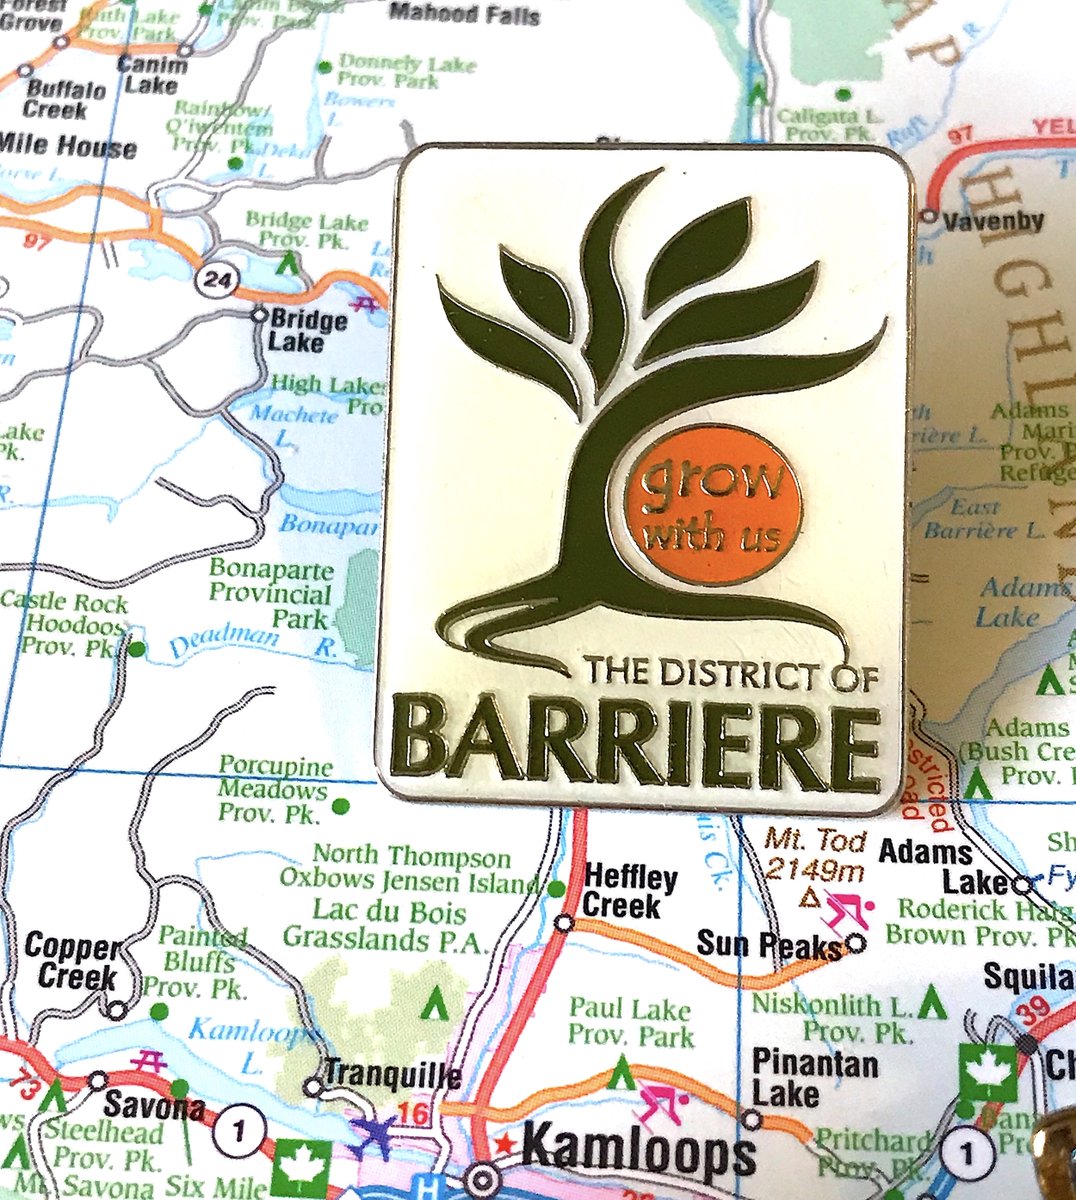 125. BARRIERE - They're big into the "grow with us" motto, and it will never stop amusing me- A bit too corporate, a bit too chonky, nobody cares you're a district- is that a giant orange or a tiny sun